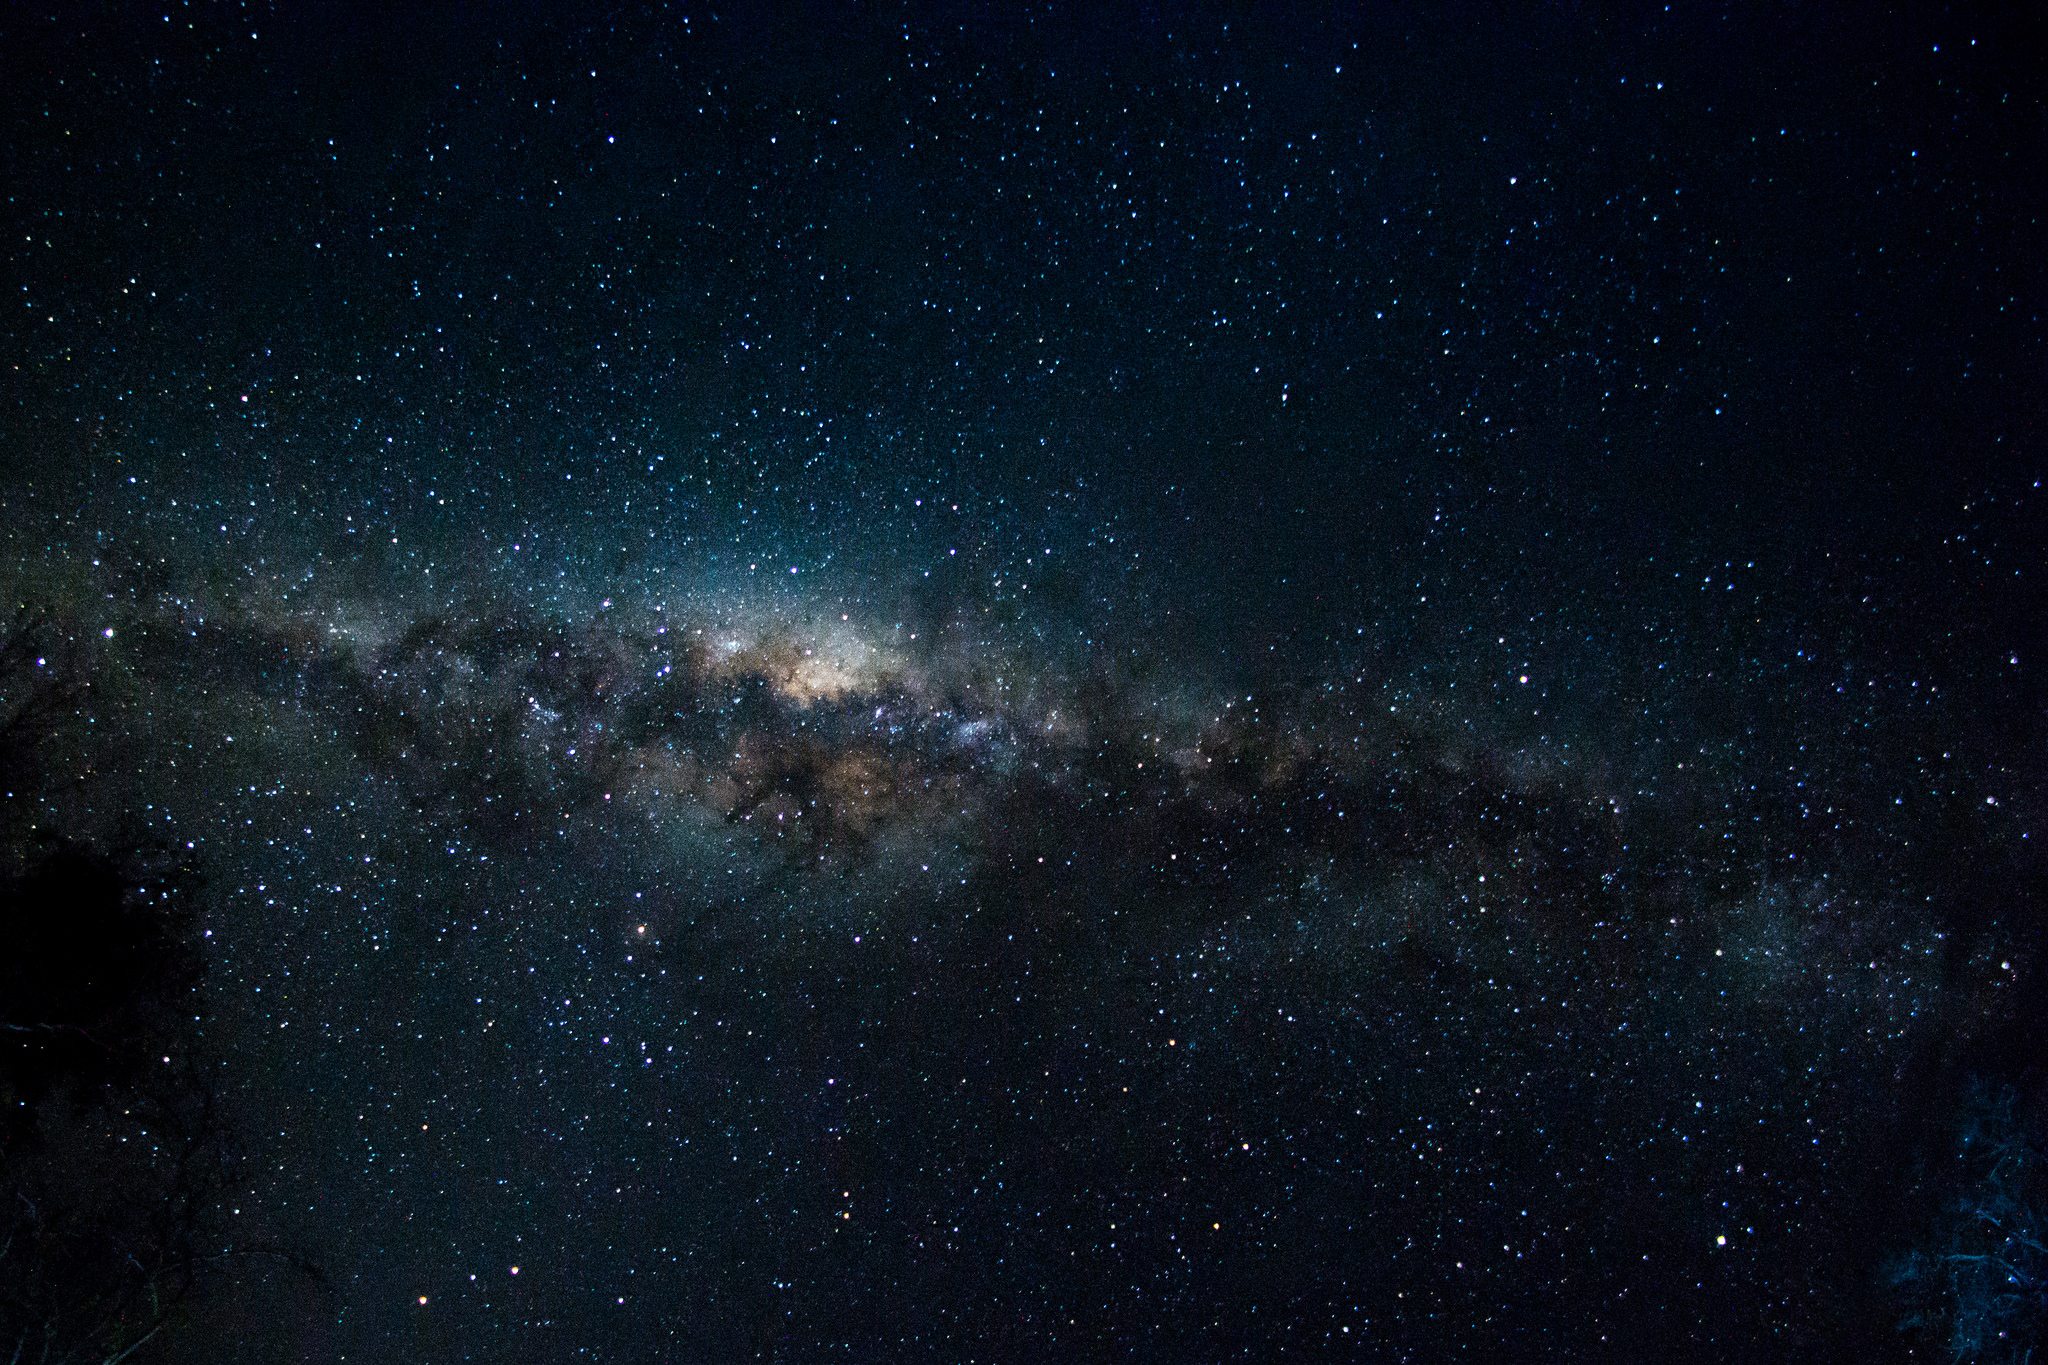 Wallpaper The Milky Way Space Star Infinity Mystery